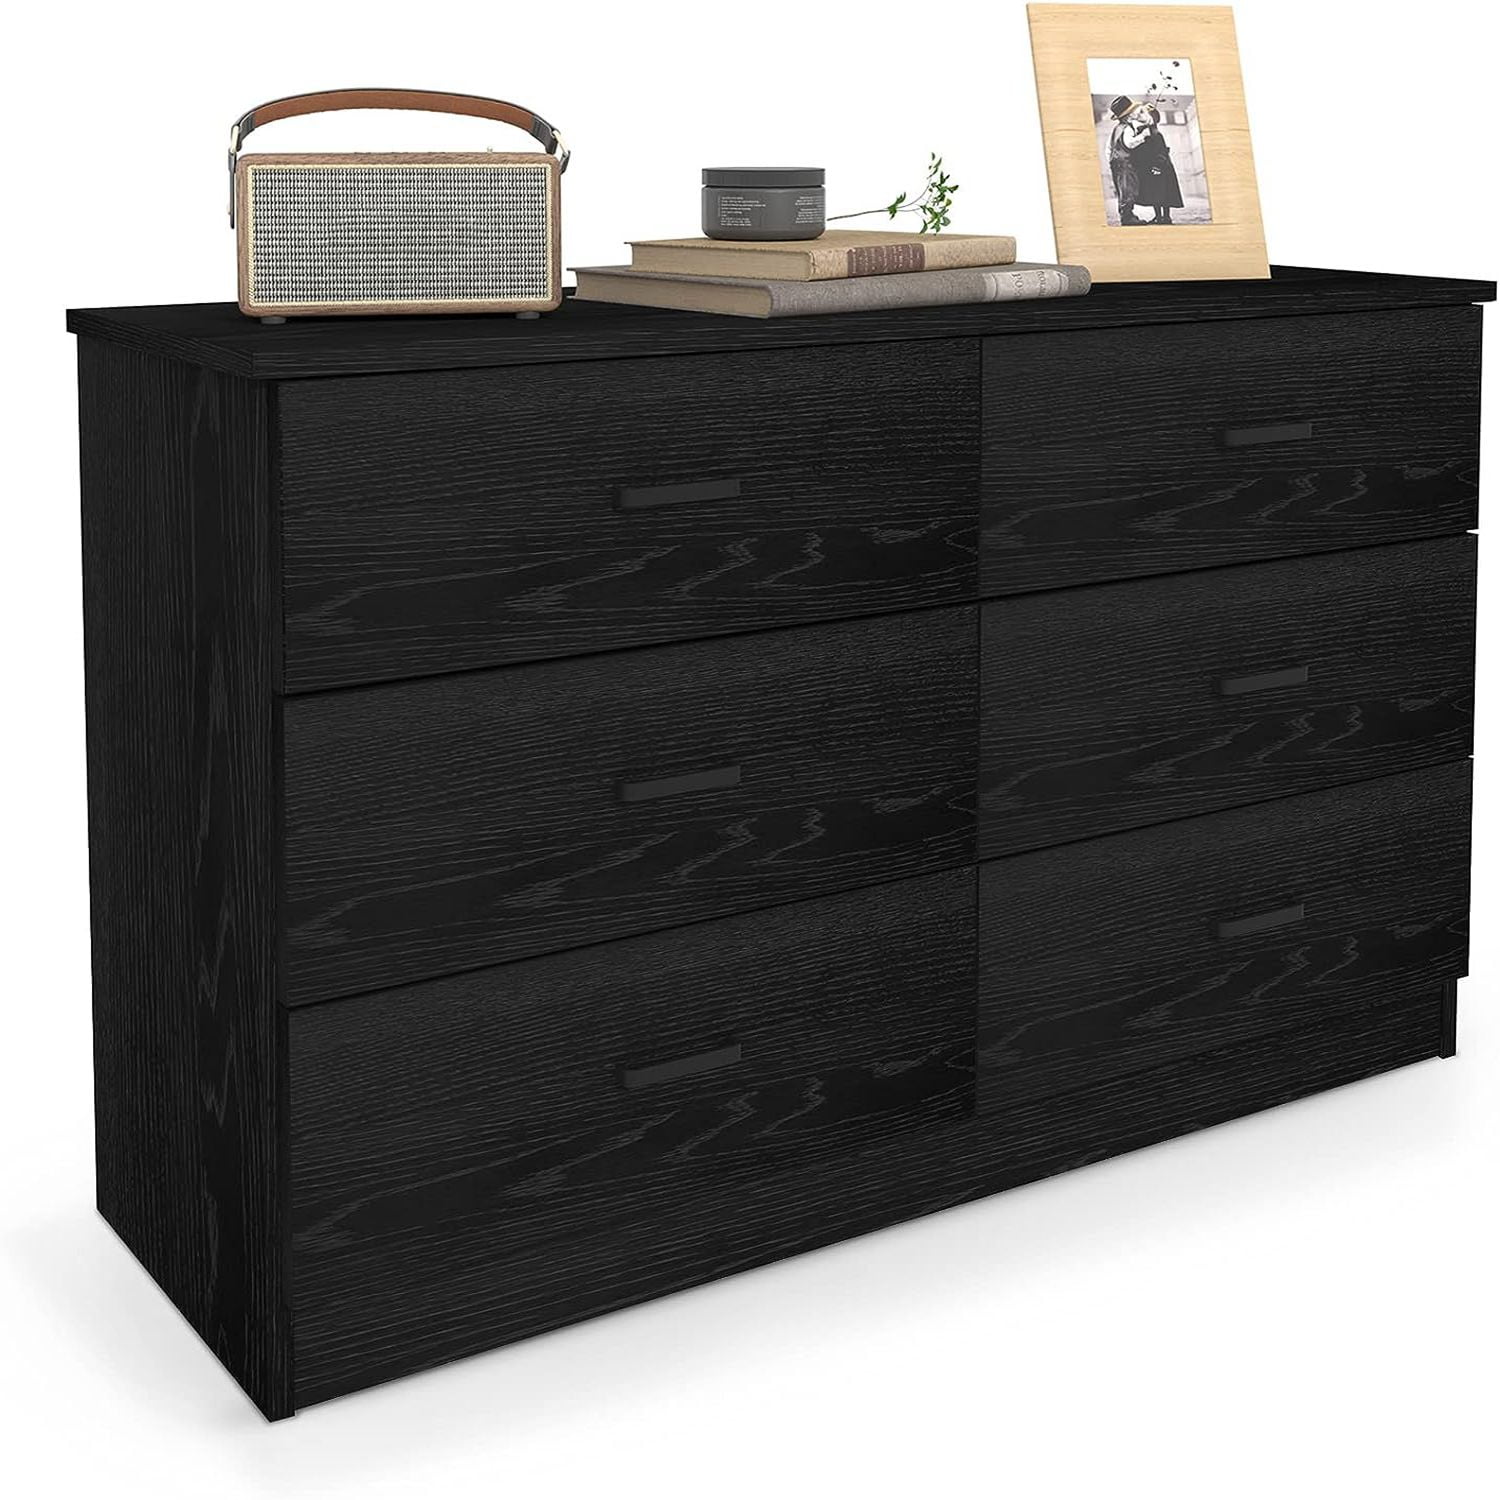 Winkalon 6 Drawer Black Double Dresser,Wood Storage Cabinet with Easy Pull Out Handles for Living Room,Chest of Drawers for Bedroom - image 1 of 11